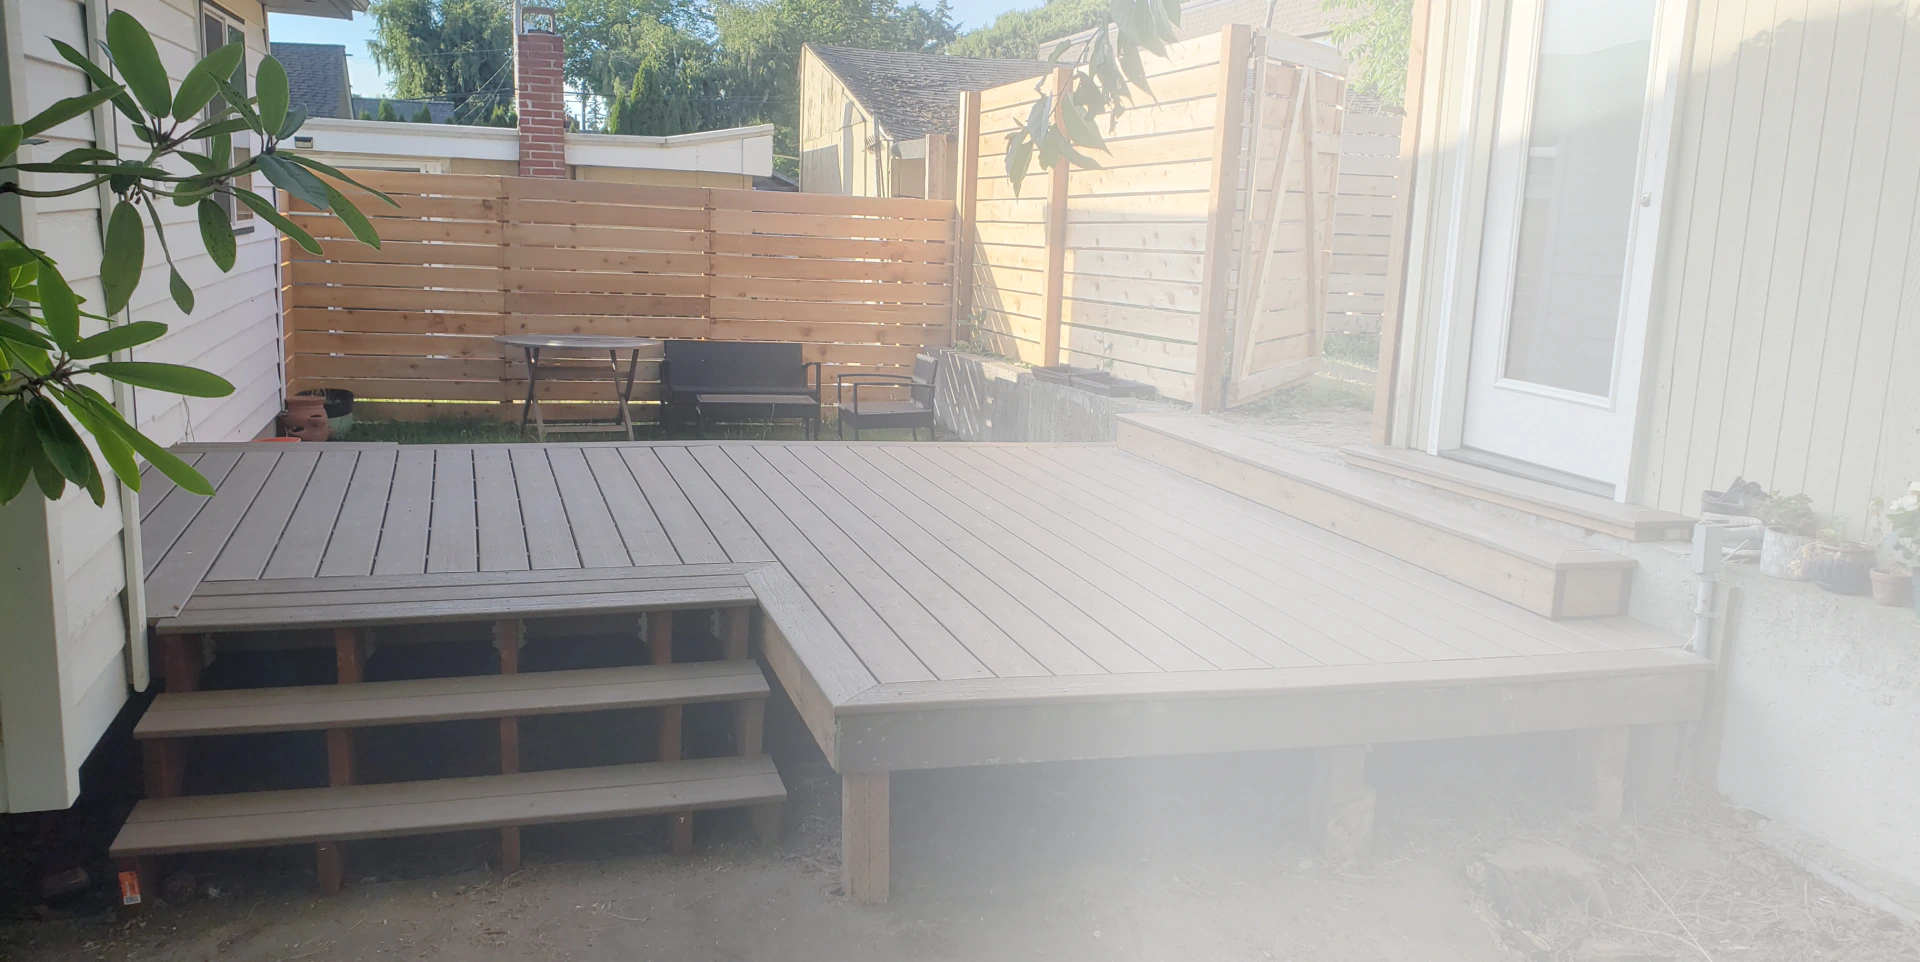 brown deck outside of a house with white frame dooors